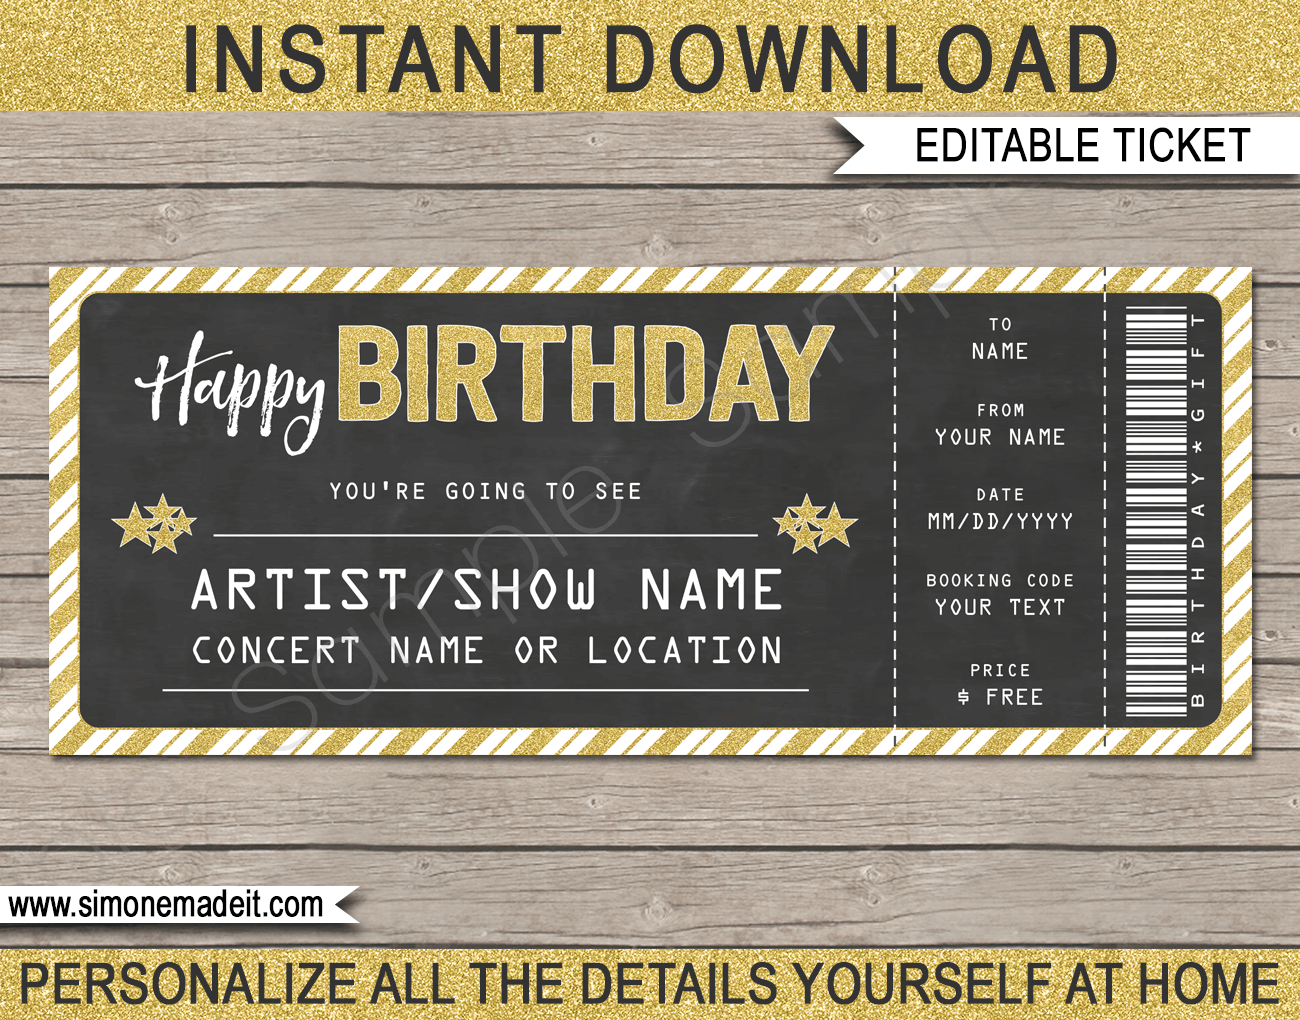 Printable Ticket Template from www.giftsbysimonemadeit.com